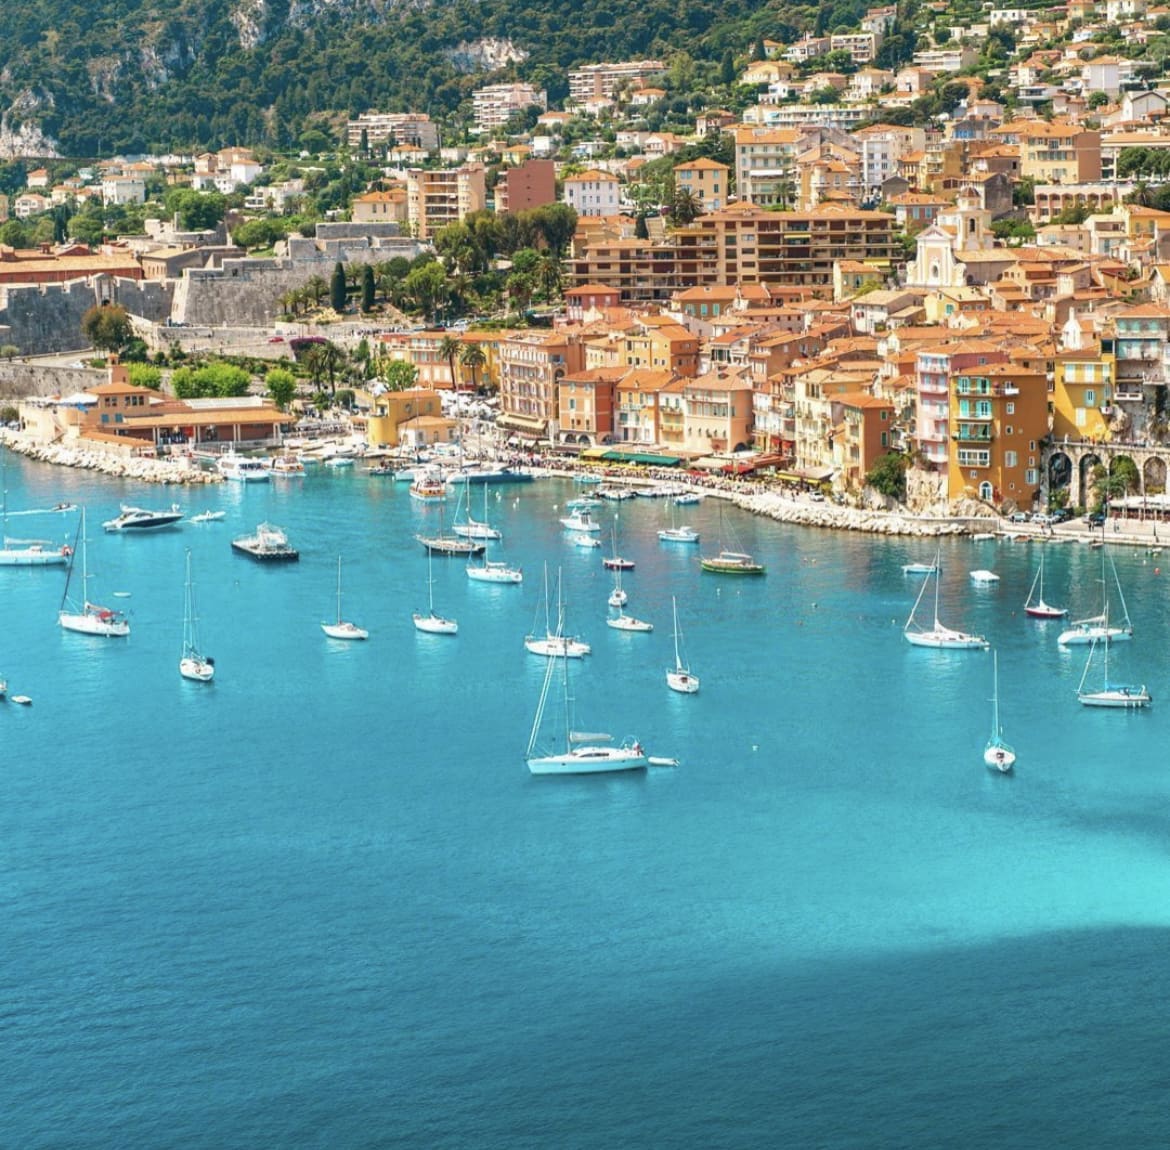 French Riviera (Côte d'Azur) - 12 Of The Best Places To Visit In France